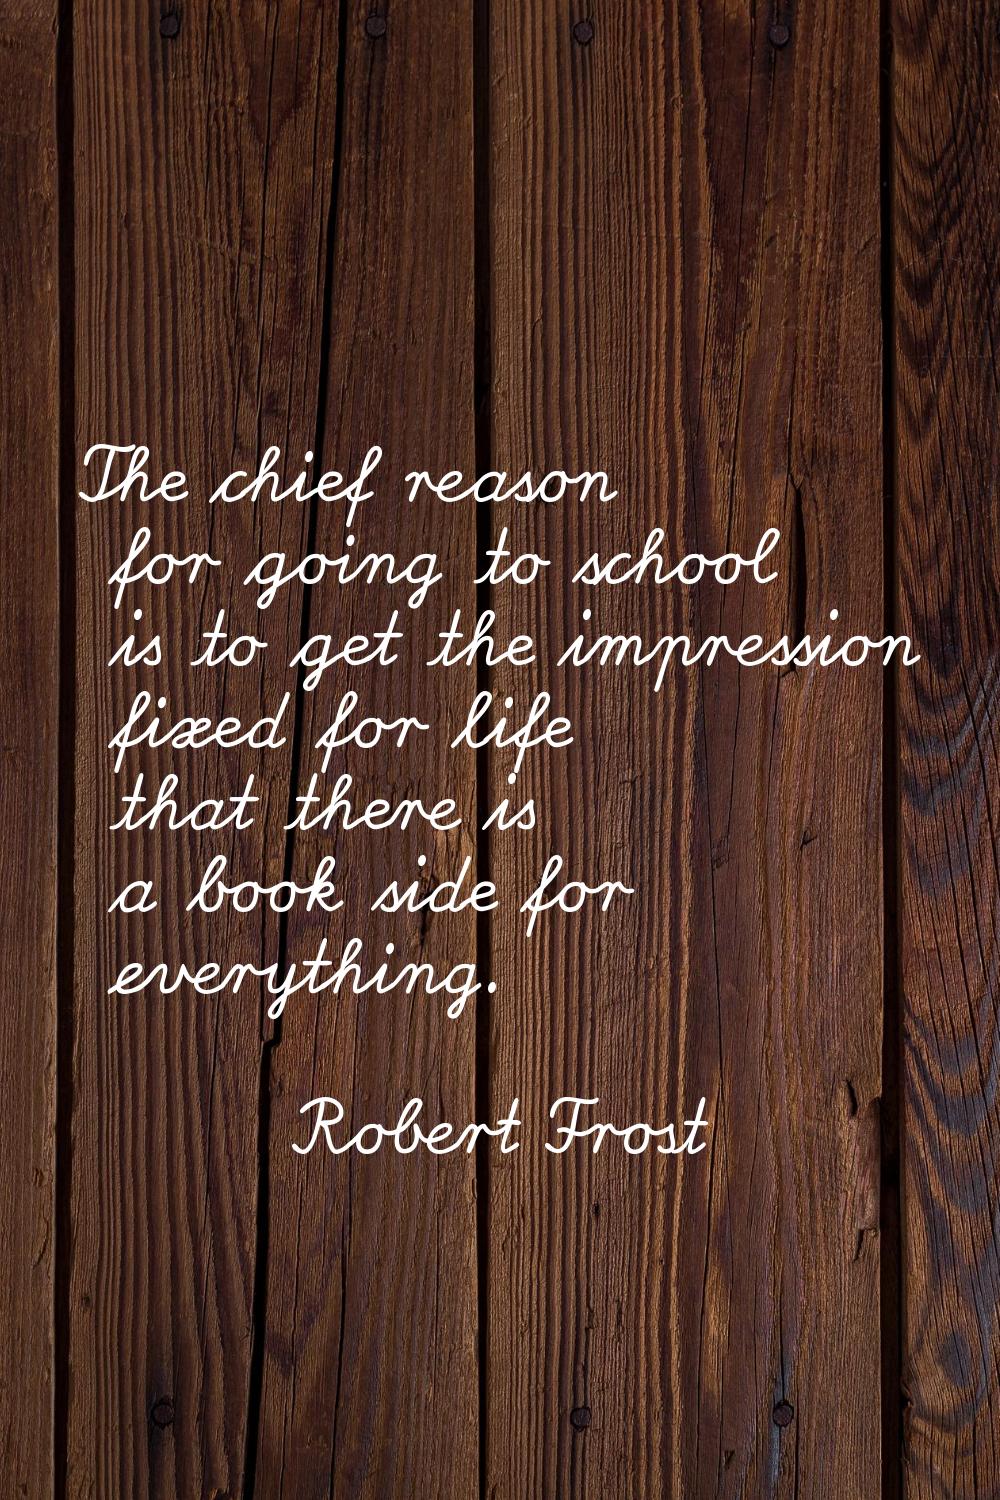 The chief reason for going to school is to get the impression fixed for life that there is a book s